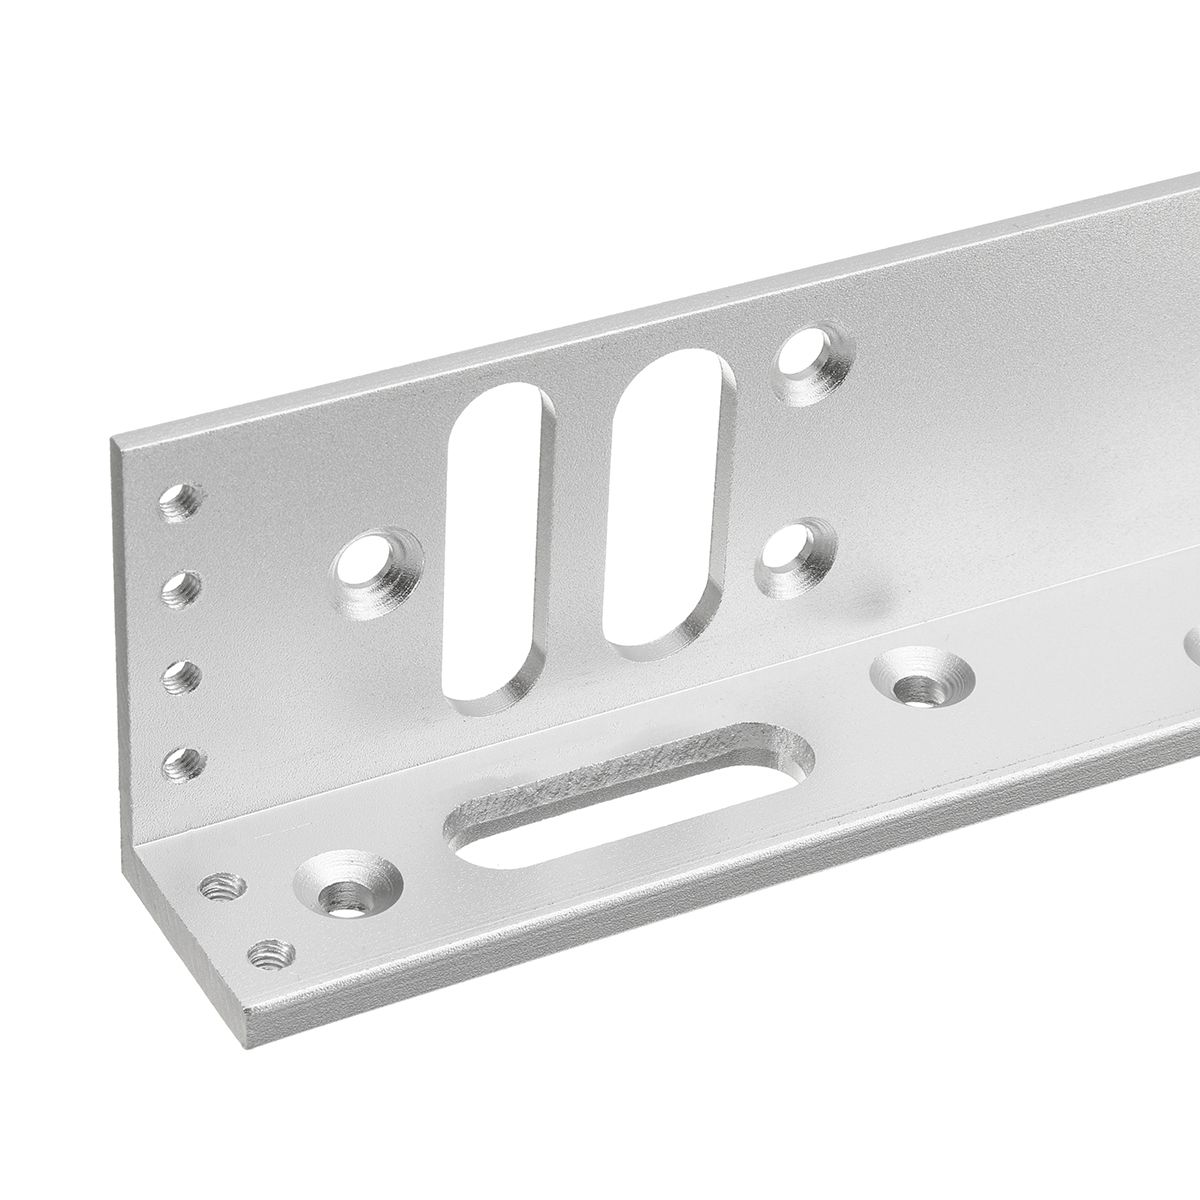 ZL-Mounting-Bracket-280KG-600lbs-Electric-Magnetic-Lock-Door-Access-Control-Kit-1575935